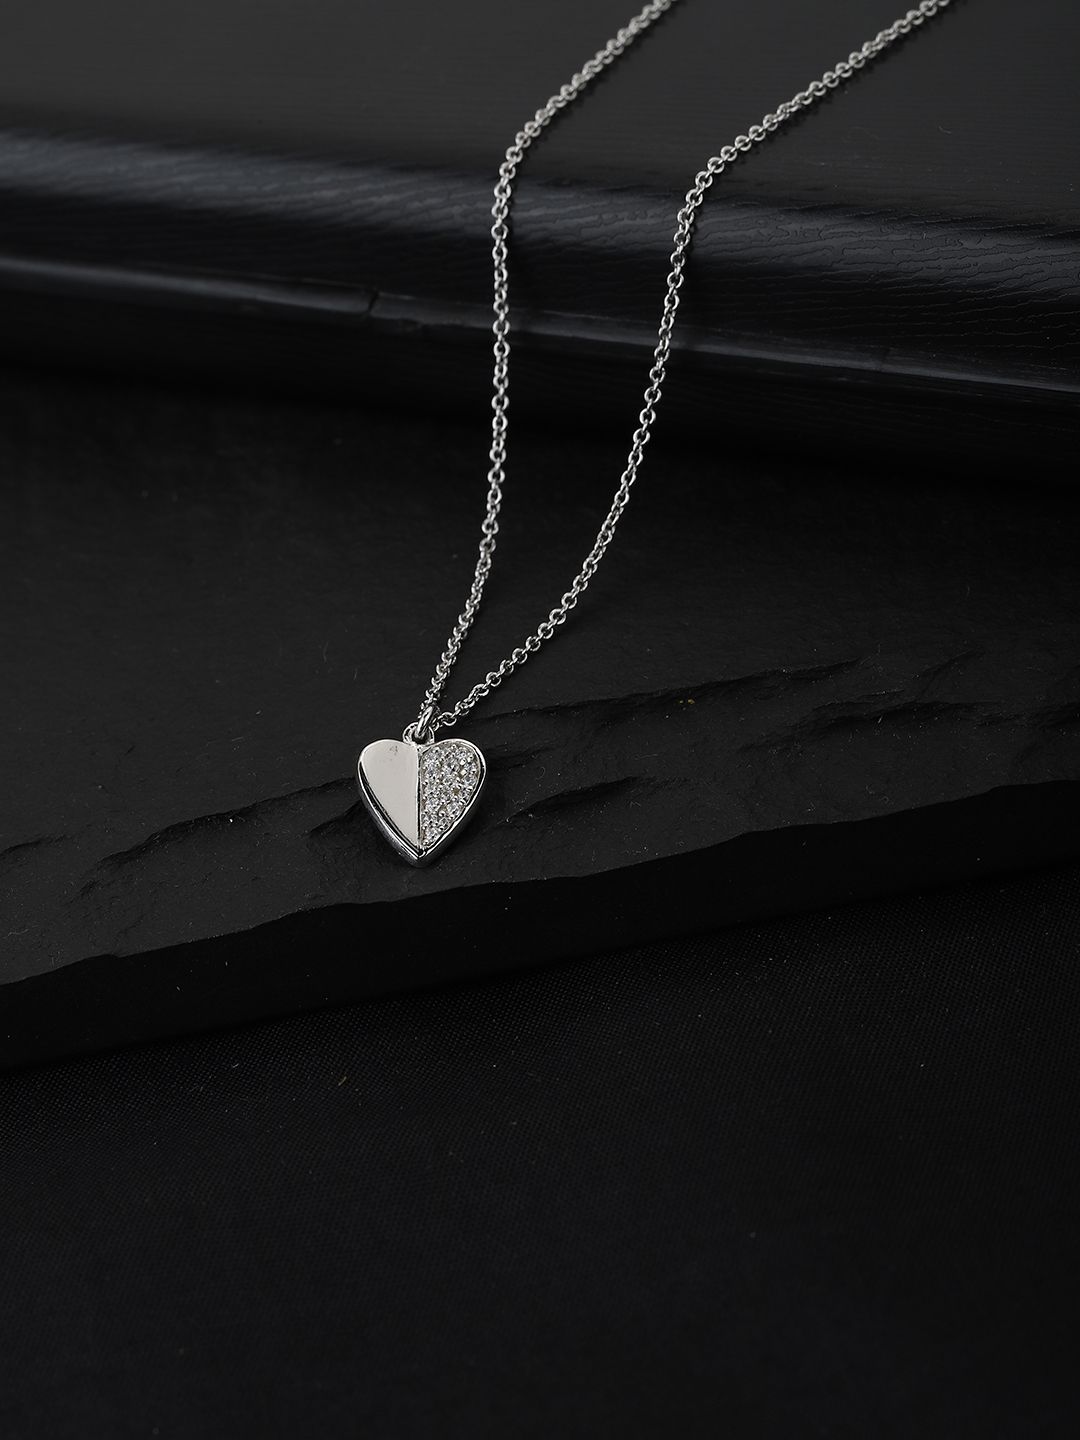 Carlton London Silver Toned Rhodium Plated CZ Studded Heart Shaped Minimal Necklace Price in India